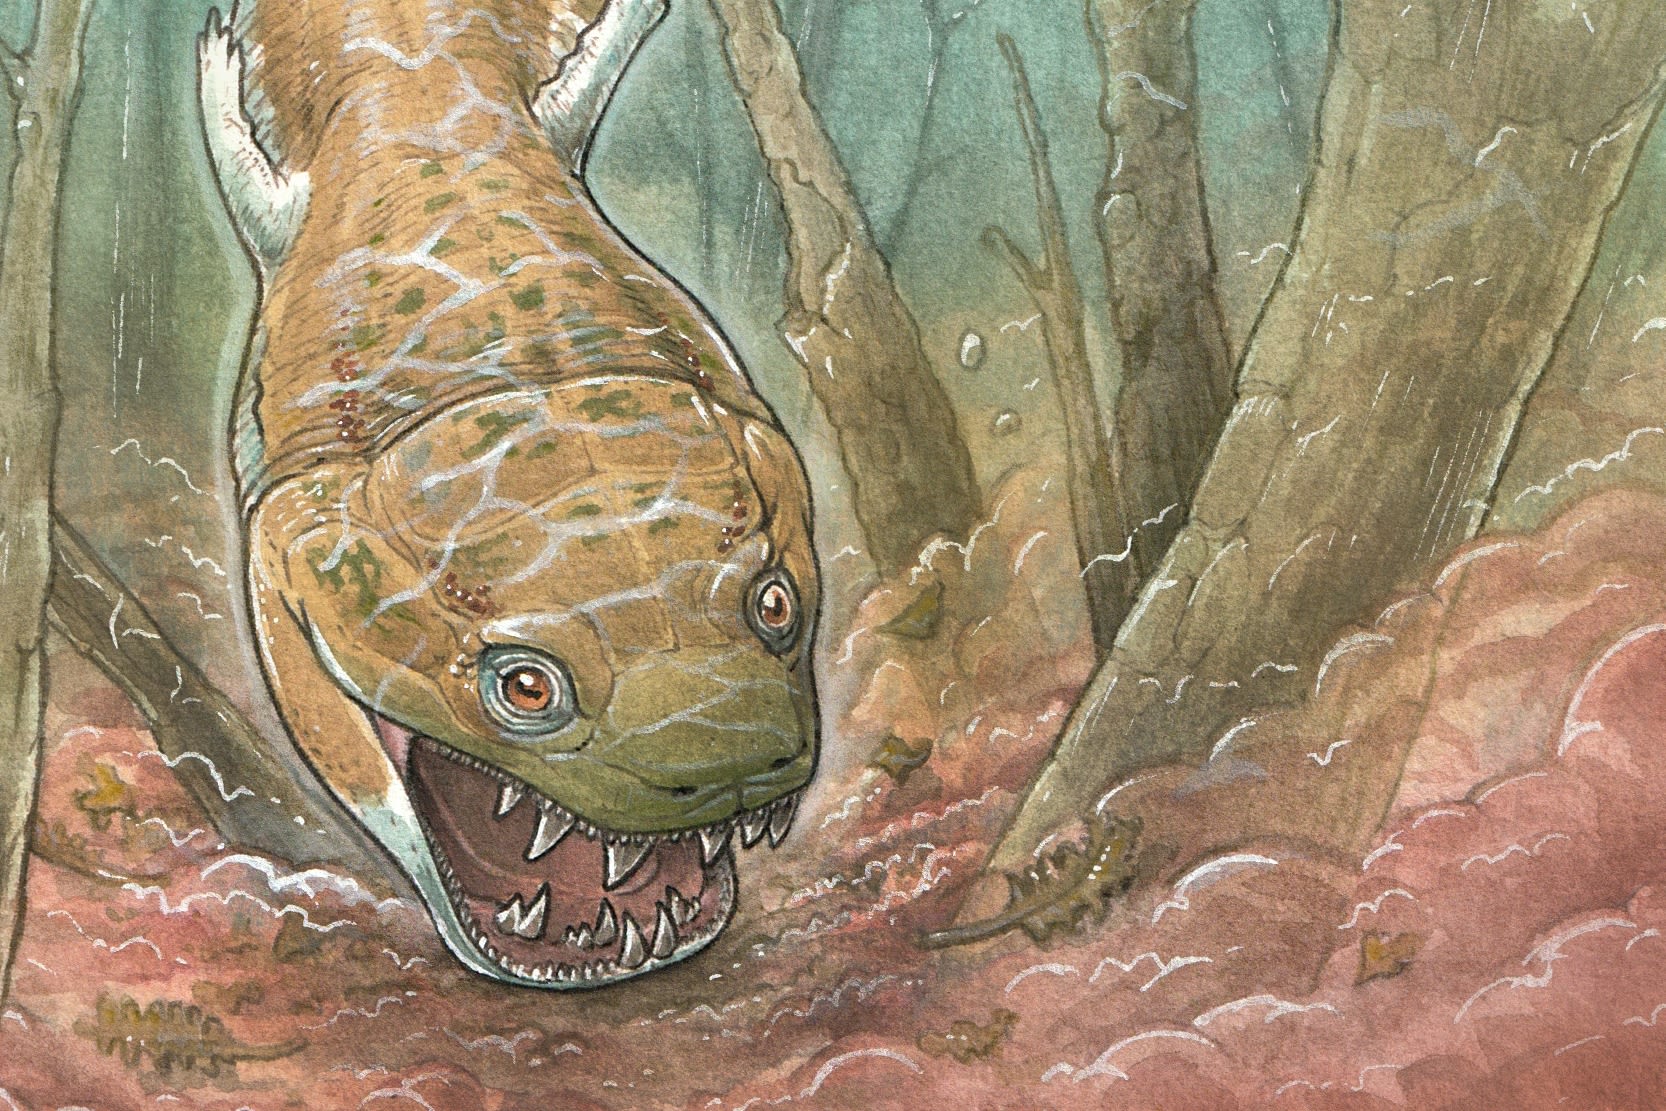 Scientists discover giant aquatic predator from a time before dinosaurs